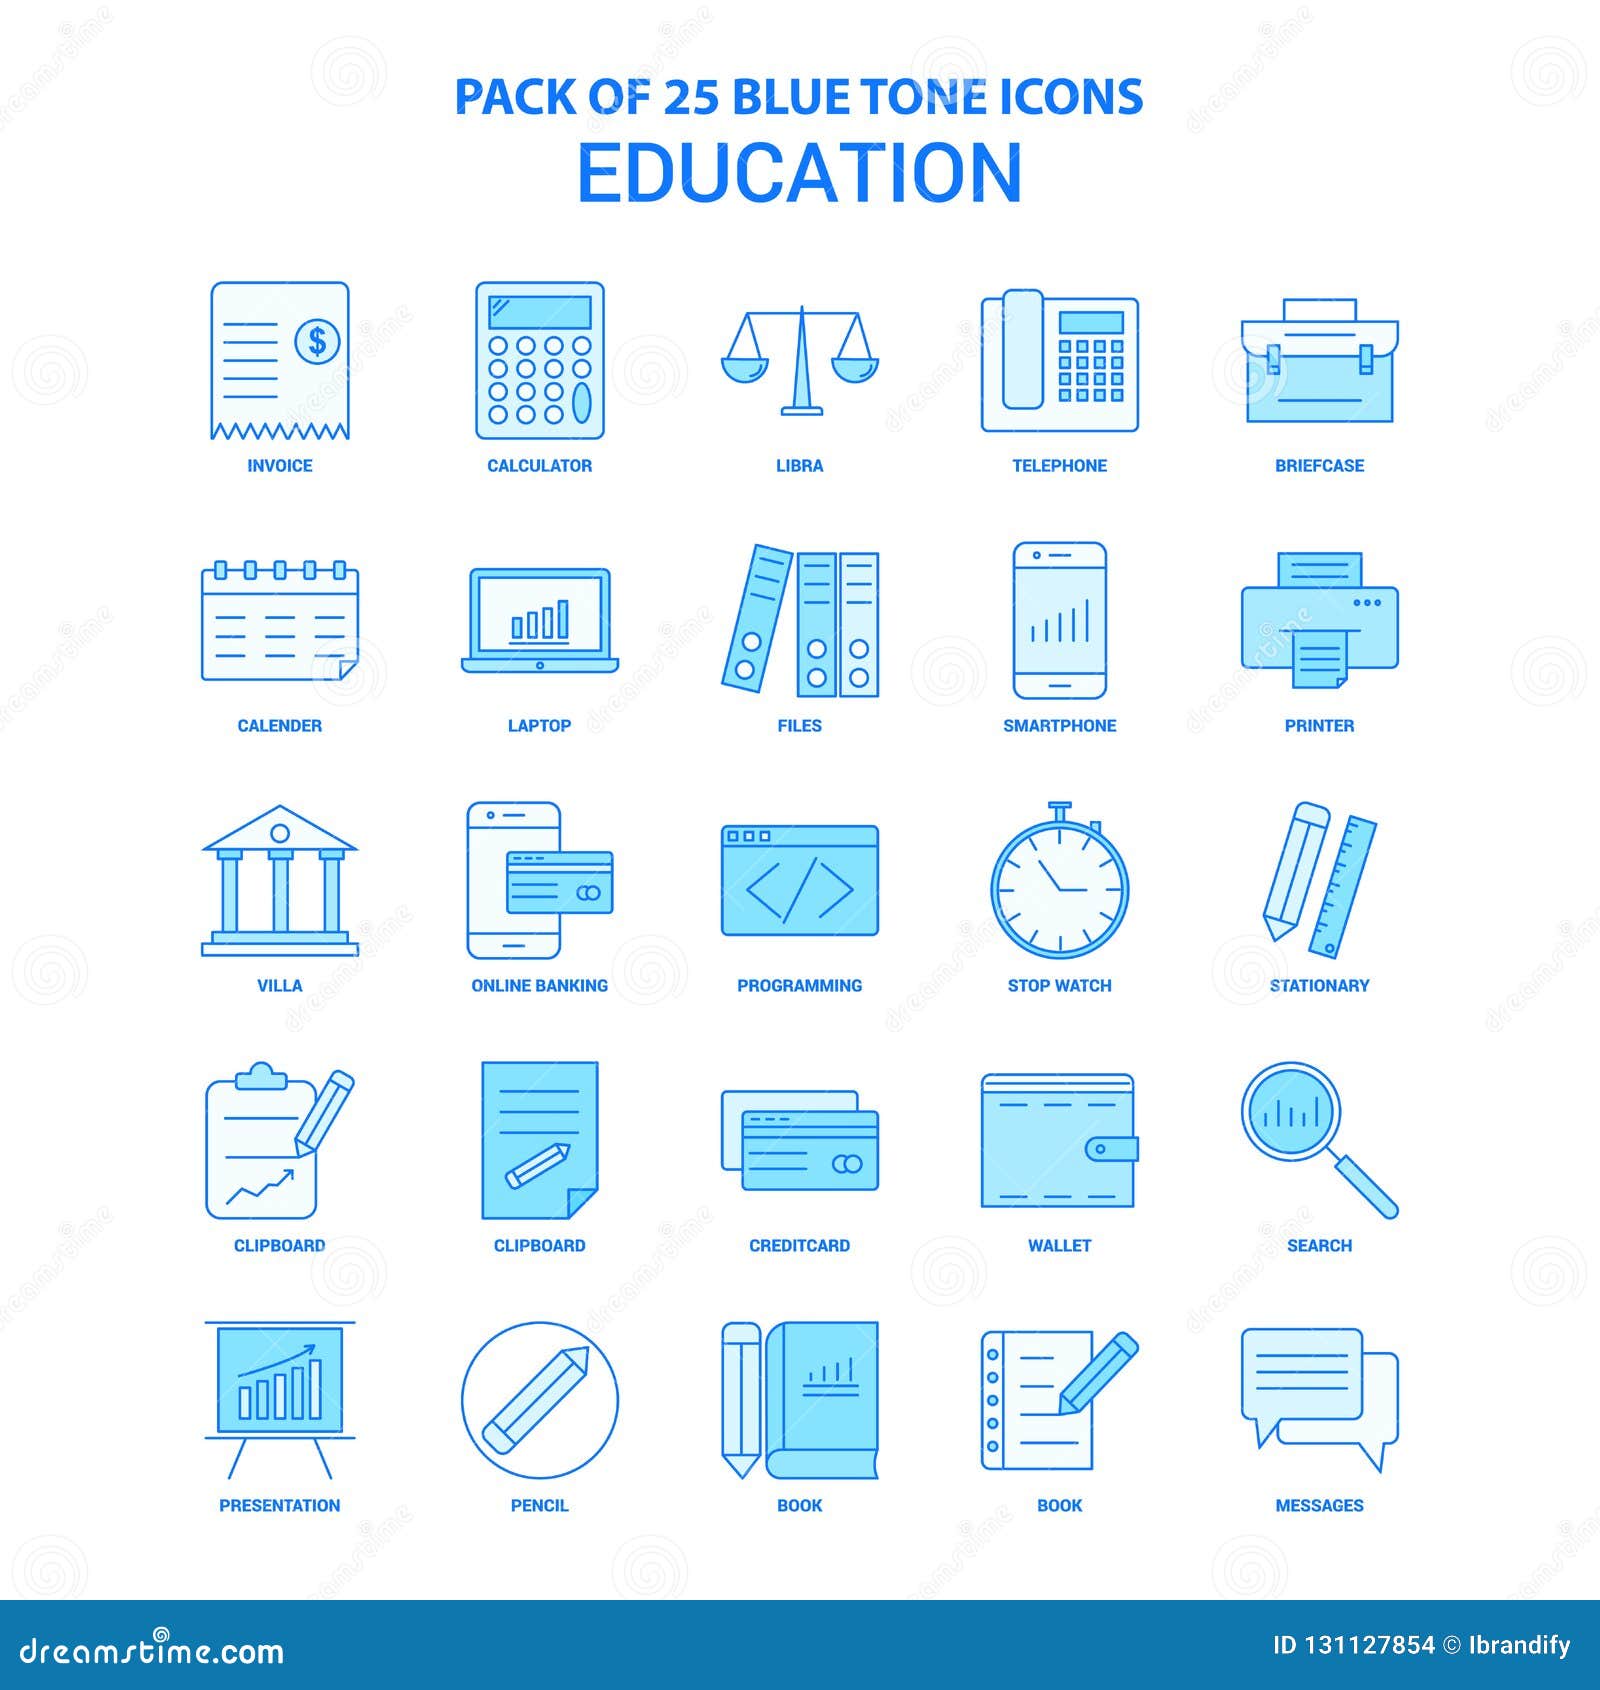 education blue tone icon pack - 25 icon sets